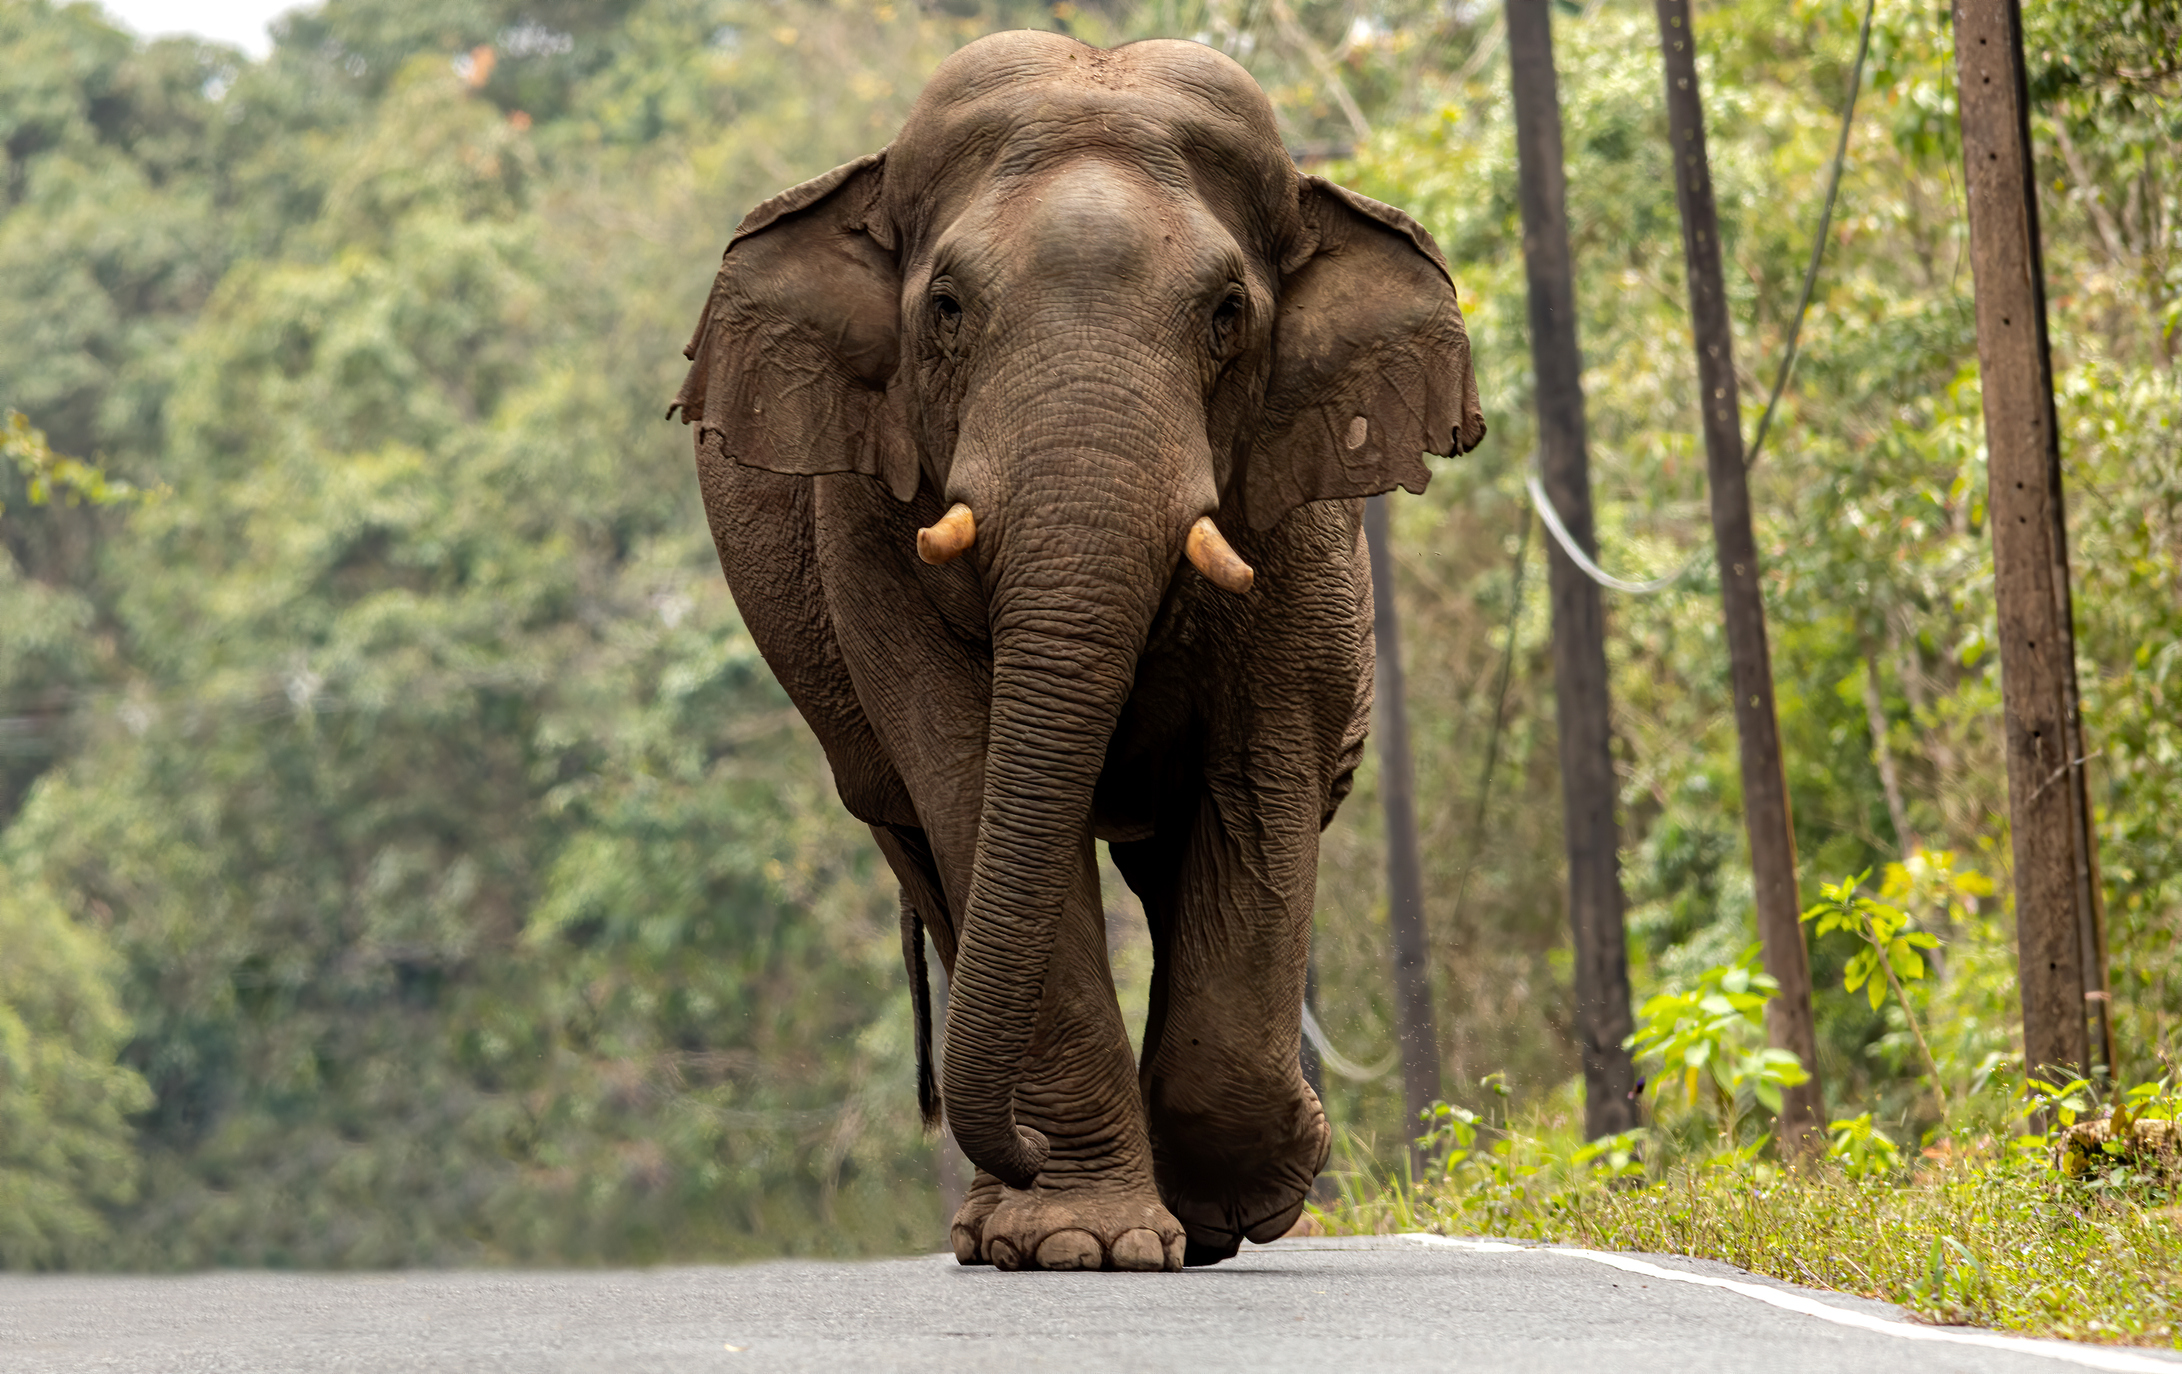 A profile picture of a large Asian elephant walking on a road with trees in the background